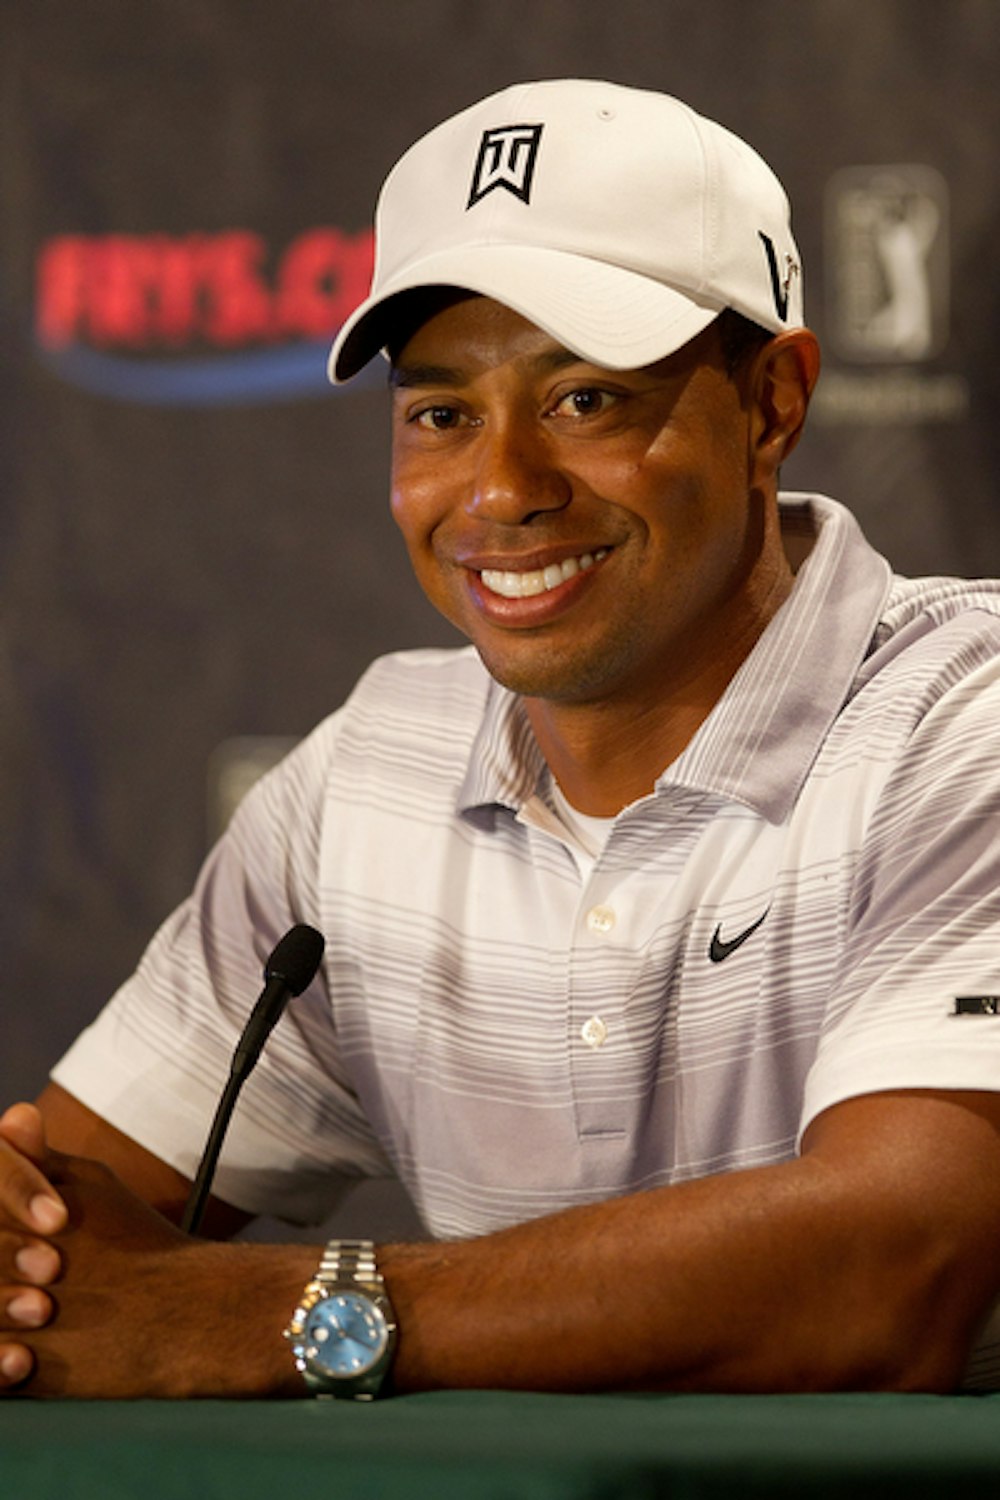 SPOTTED (Already): Tiger Woods Wearing A Rolex Datejust II At The Frys